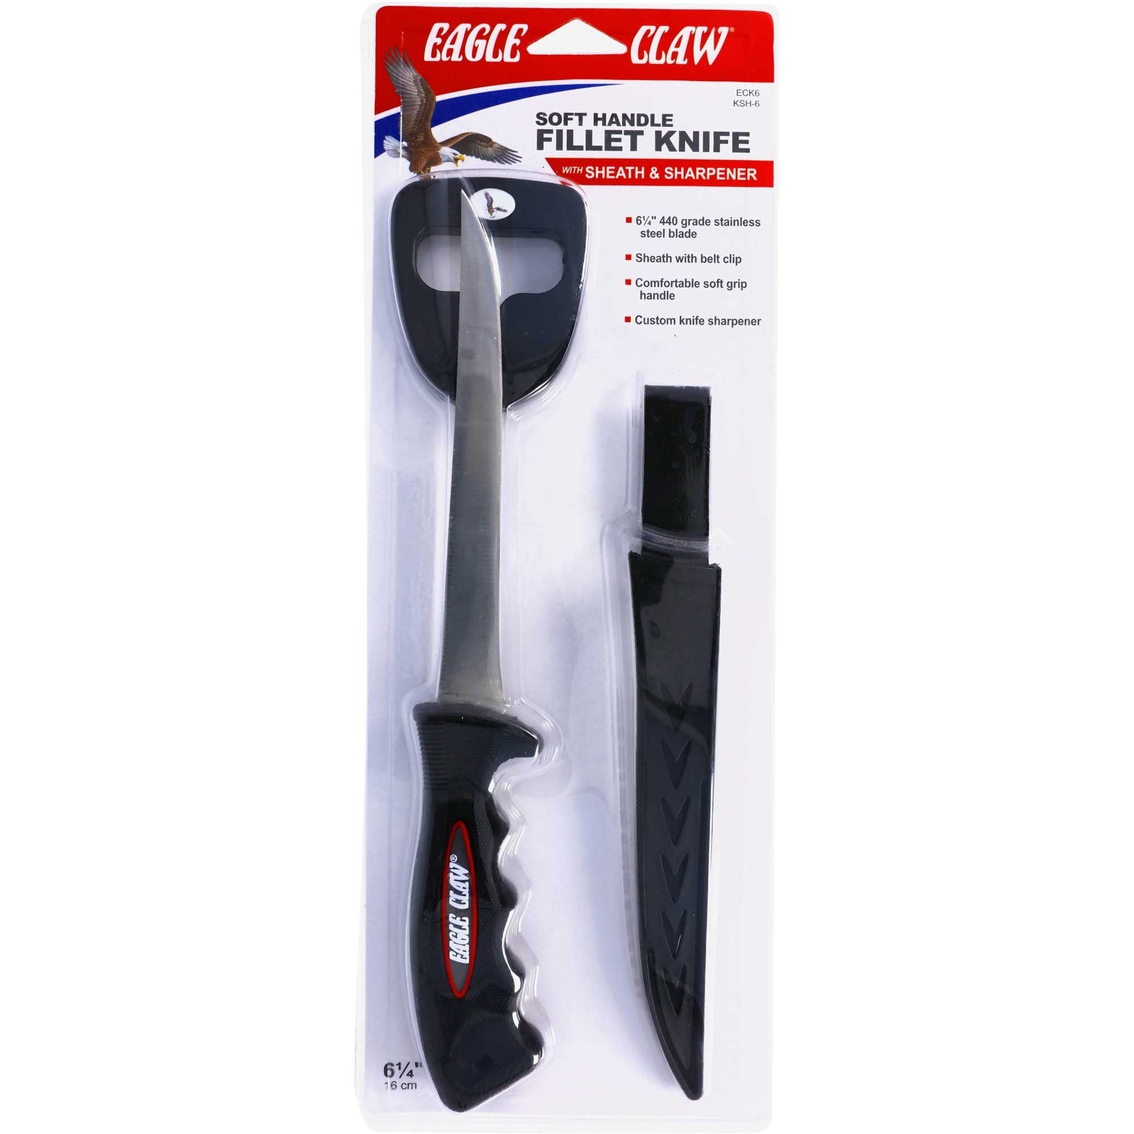 Eagle Claw 6 In. Soft Handle Fillet Knife With Sheath And